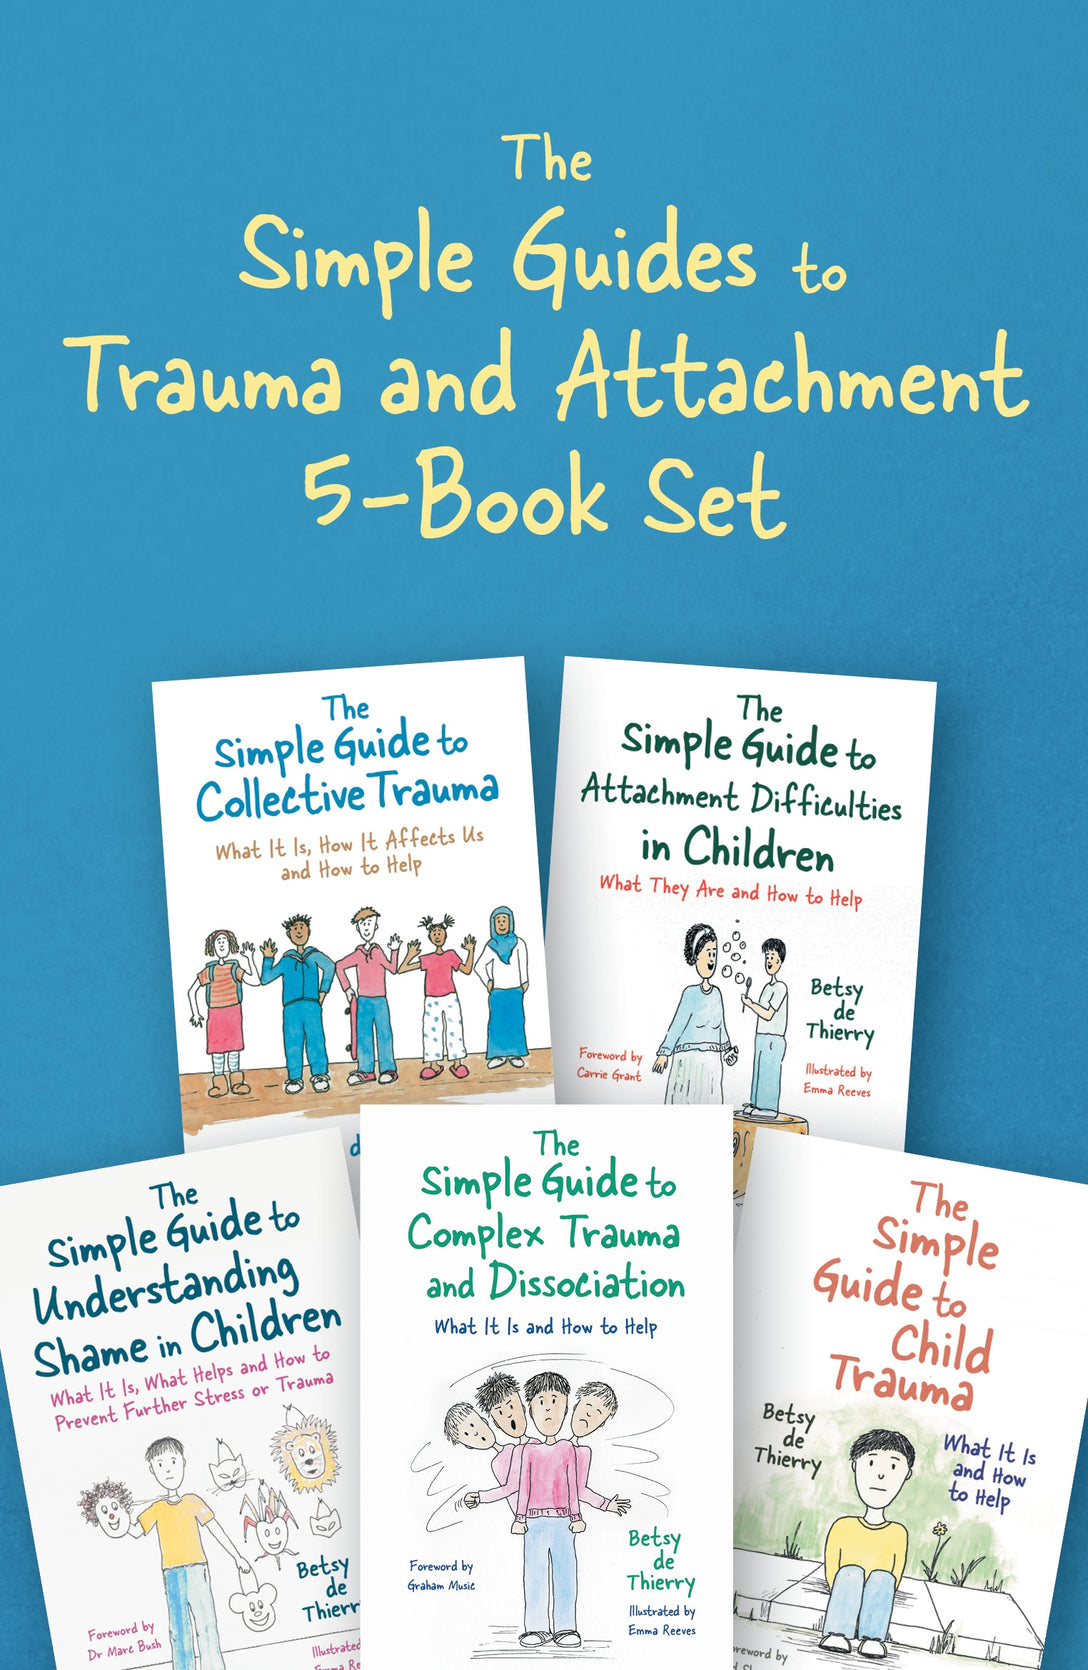 The Simple Guides to Trauma and Attachment 5-Book Set by Emma Reeves, Betsy de Thierry